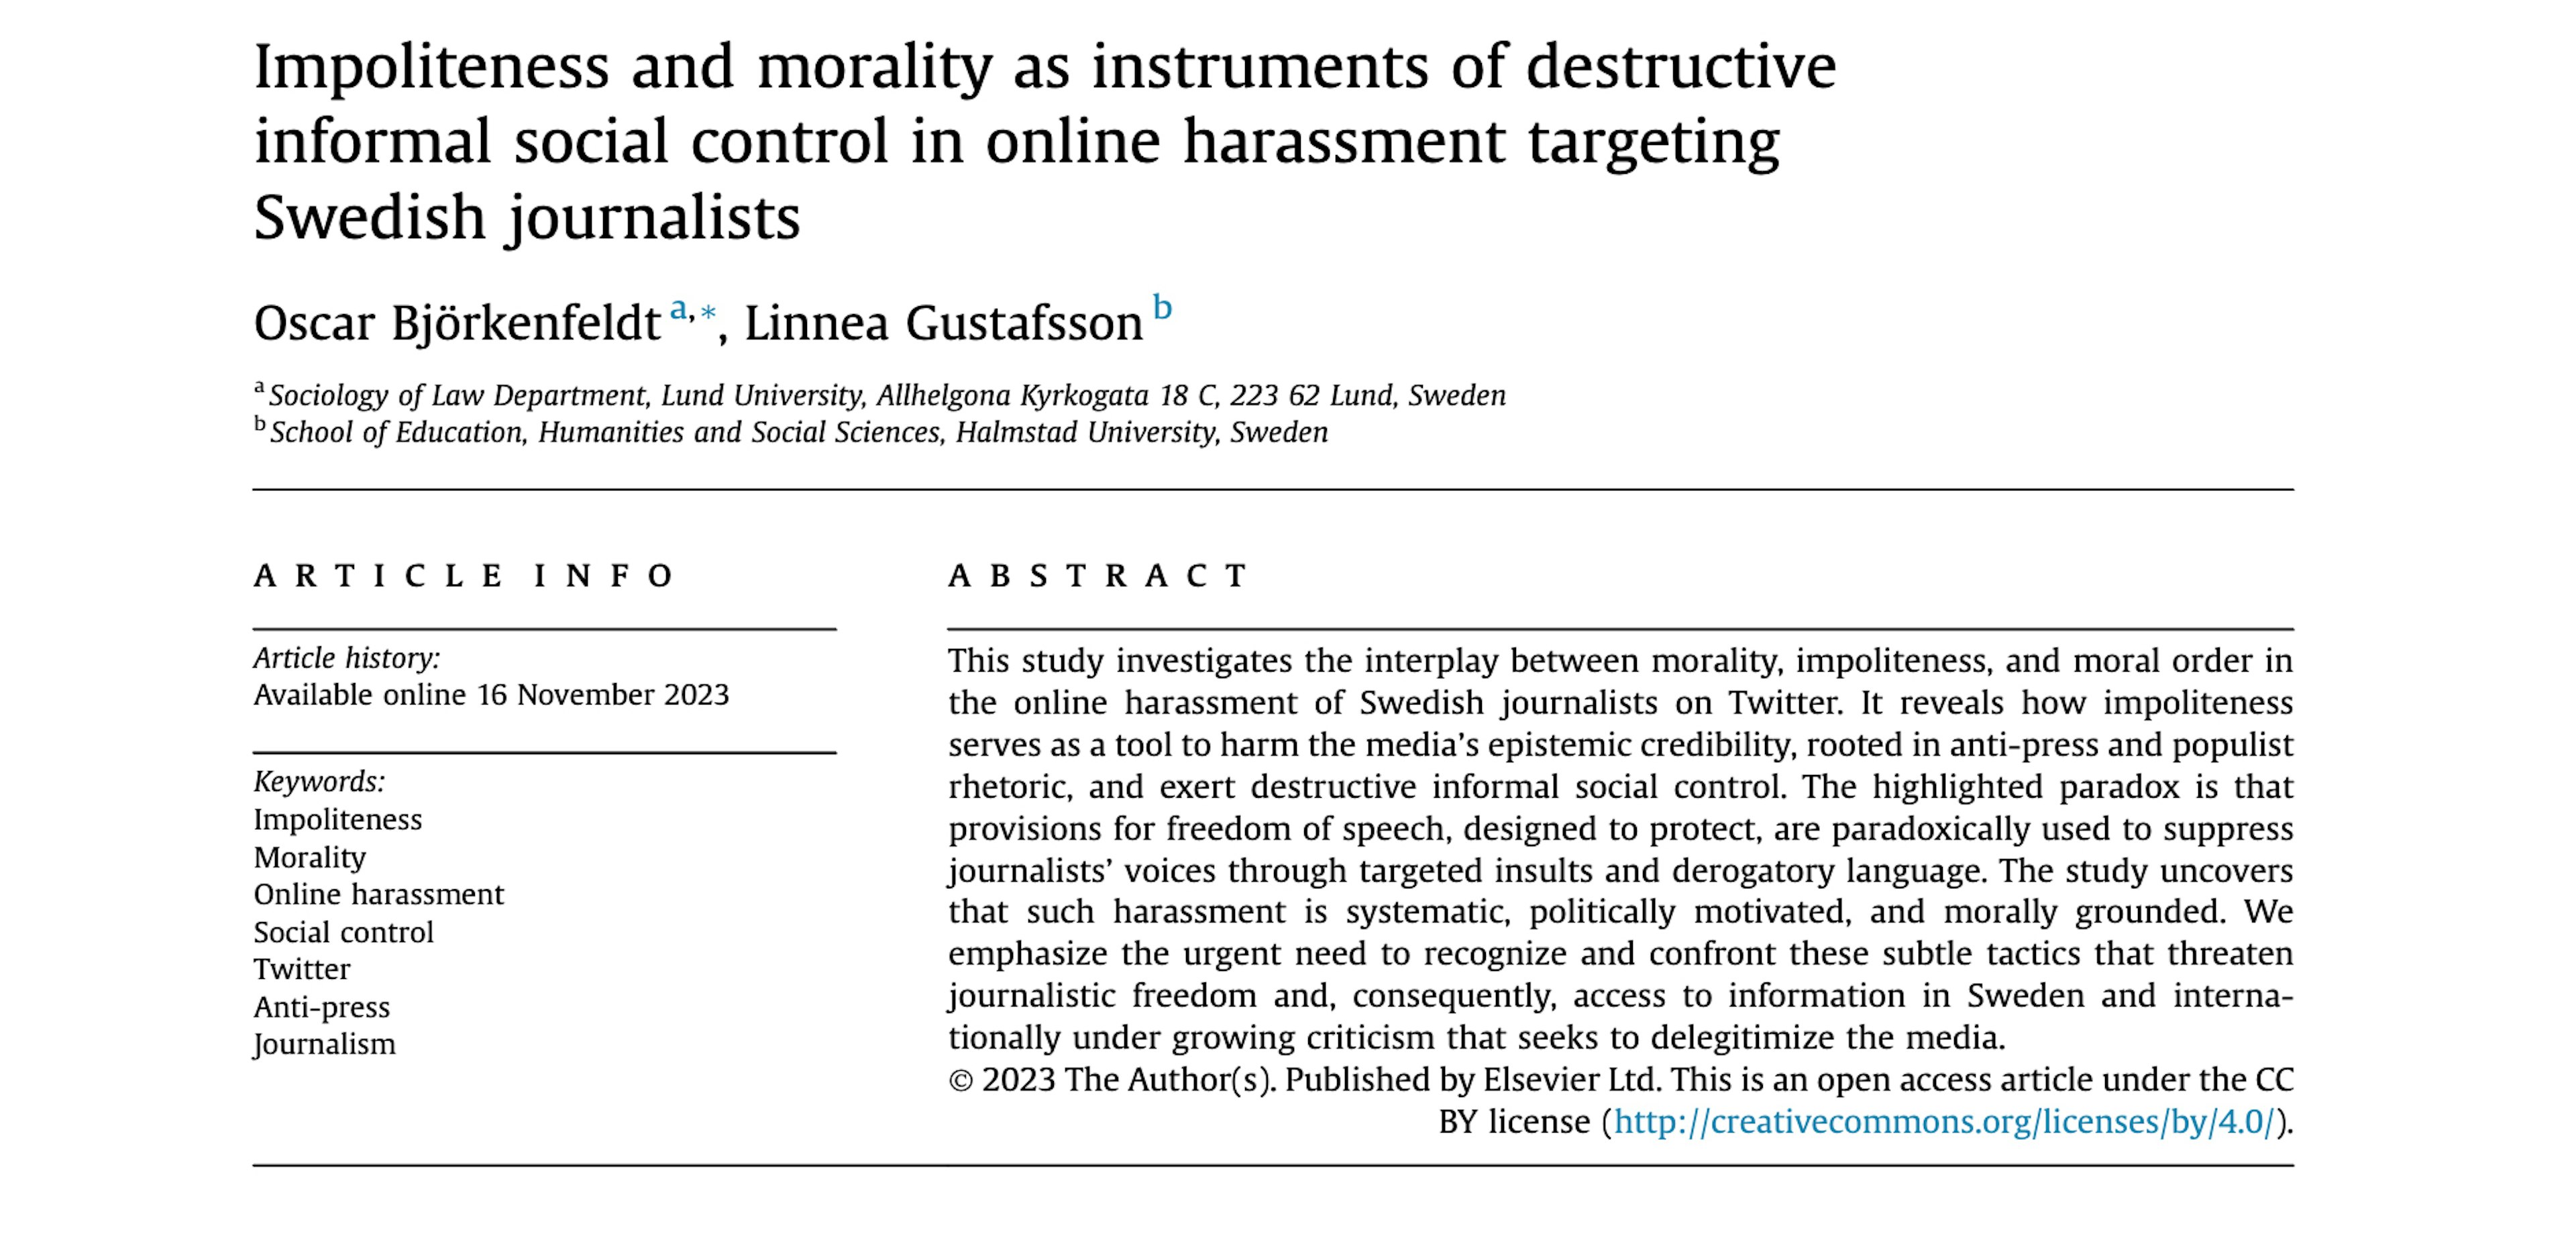 Impoliteness and morality as instruments of destructive informal social control in online harassment targeting Swedish journalists